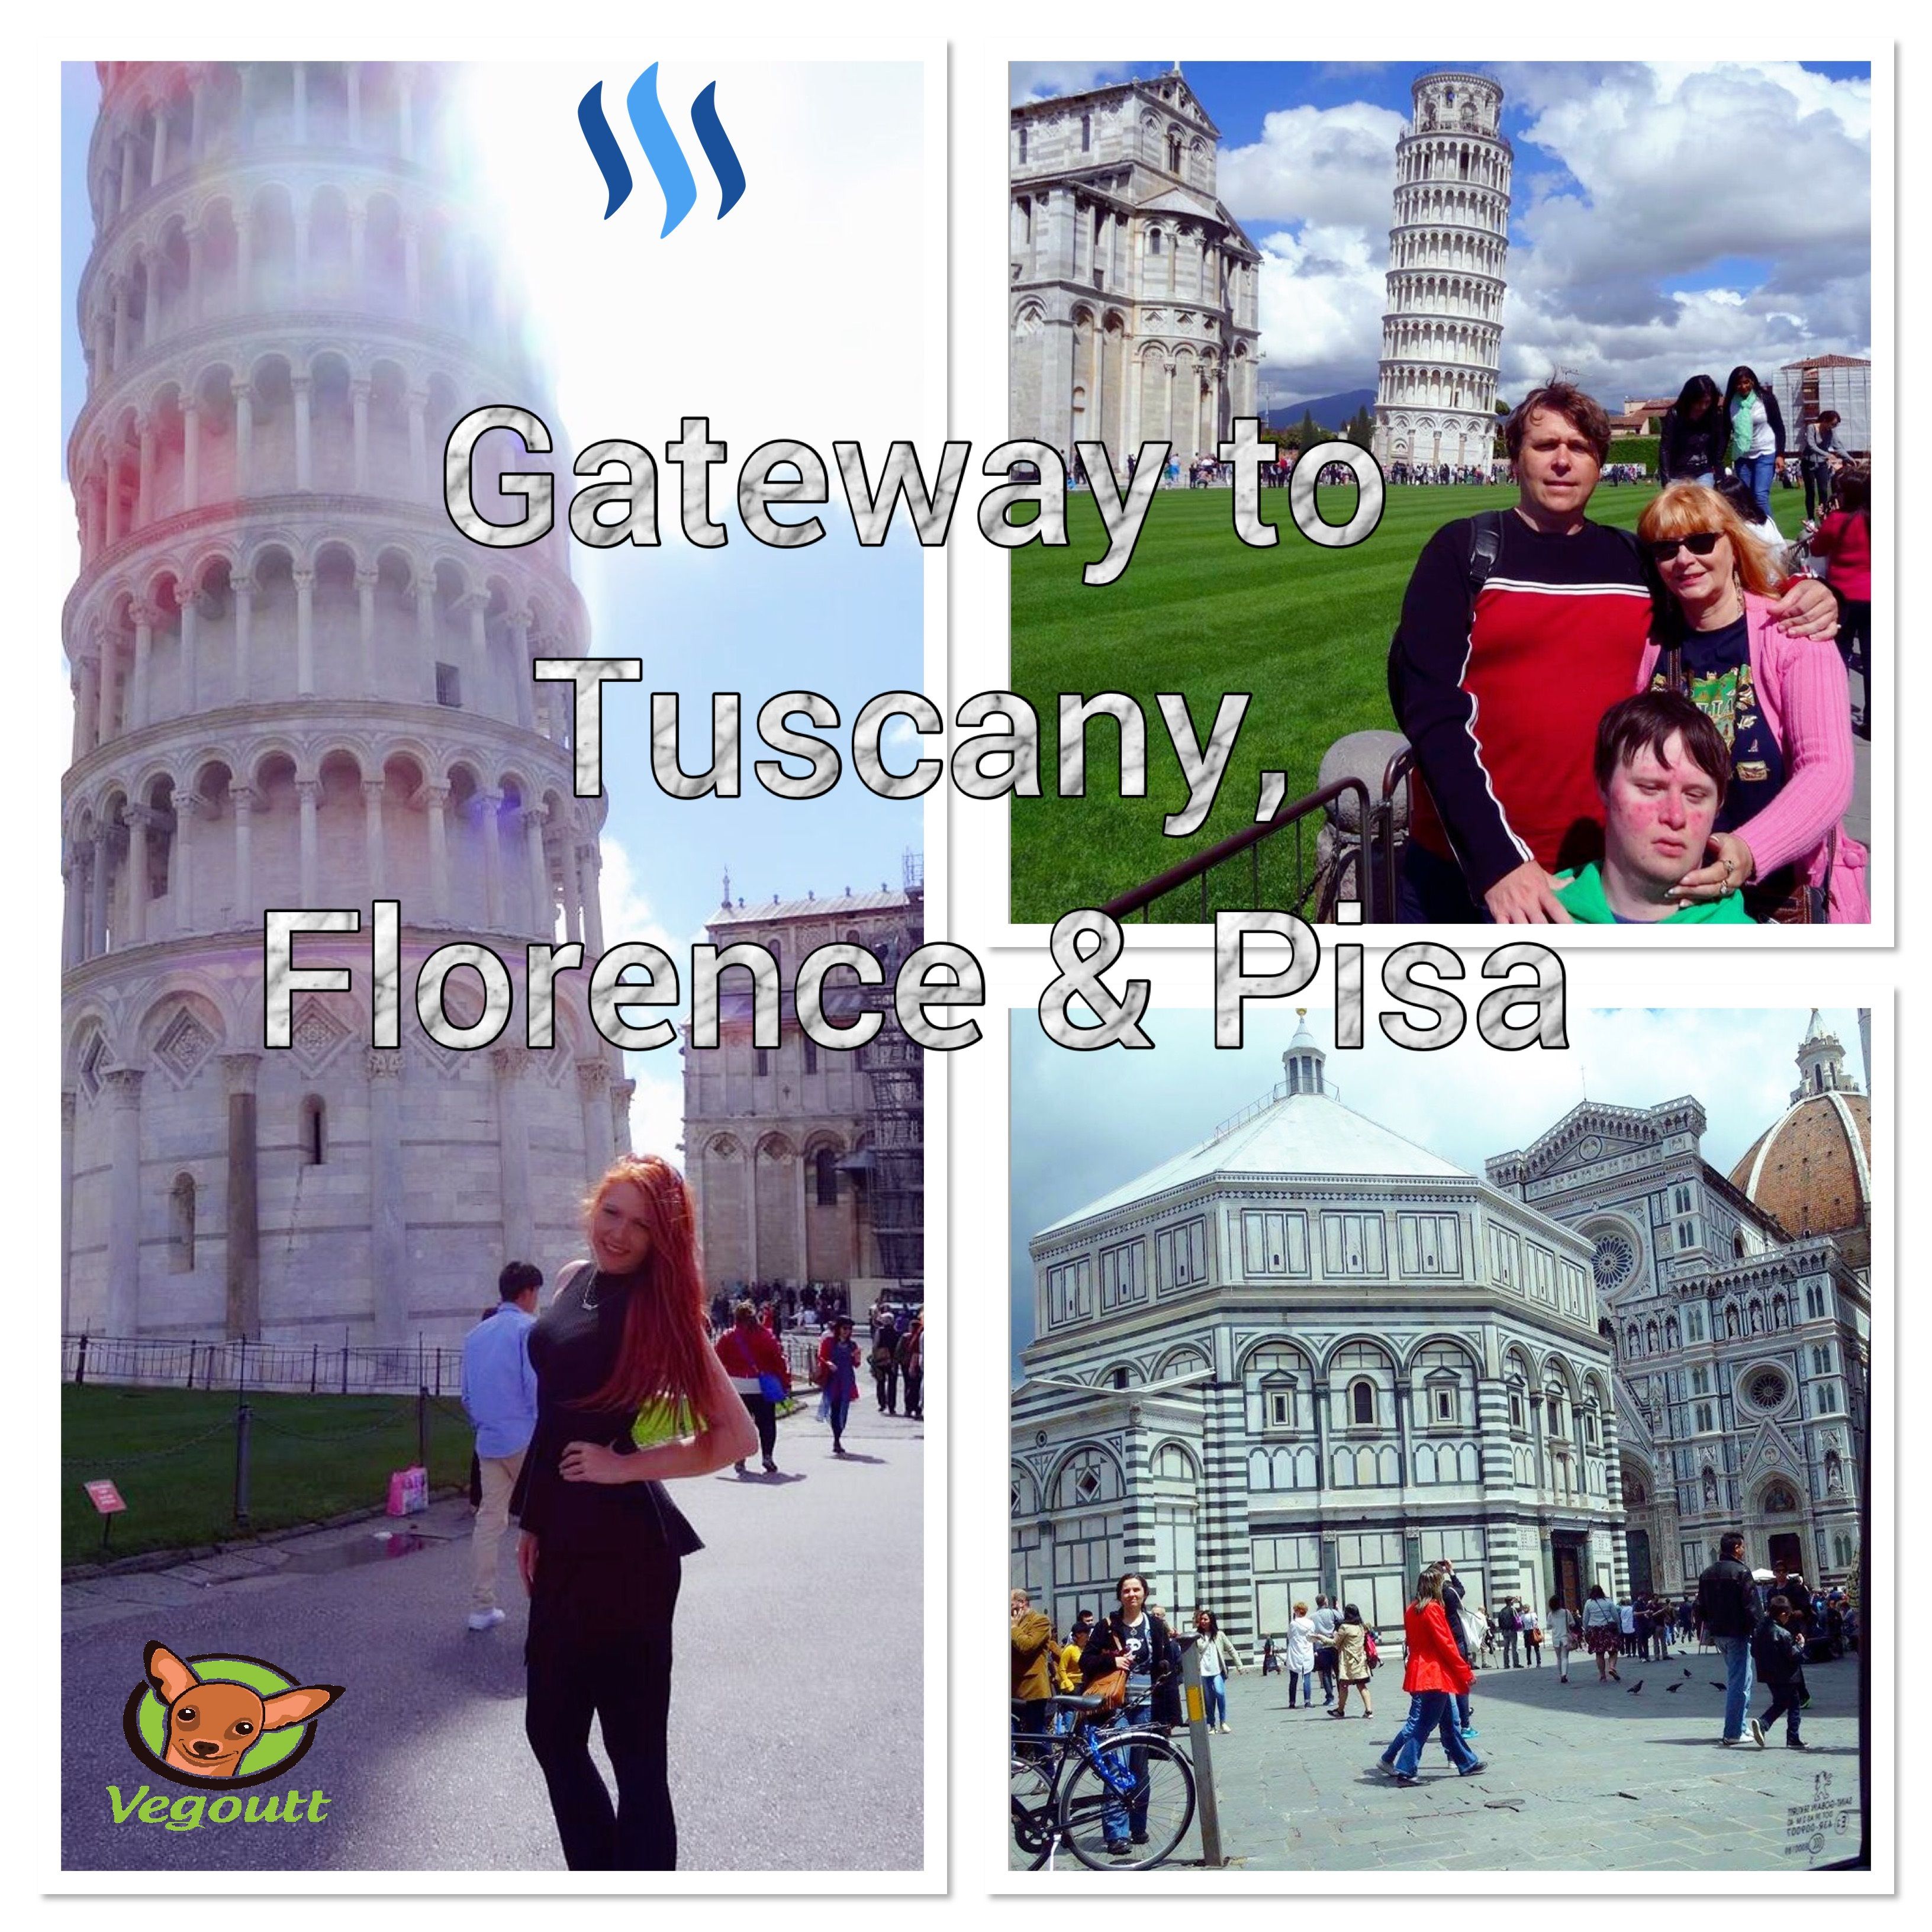 #1 Gateway to Tuscany, Florence and Pisa, Italy